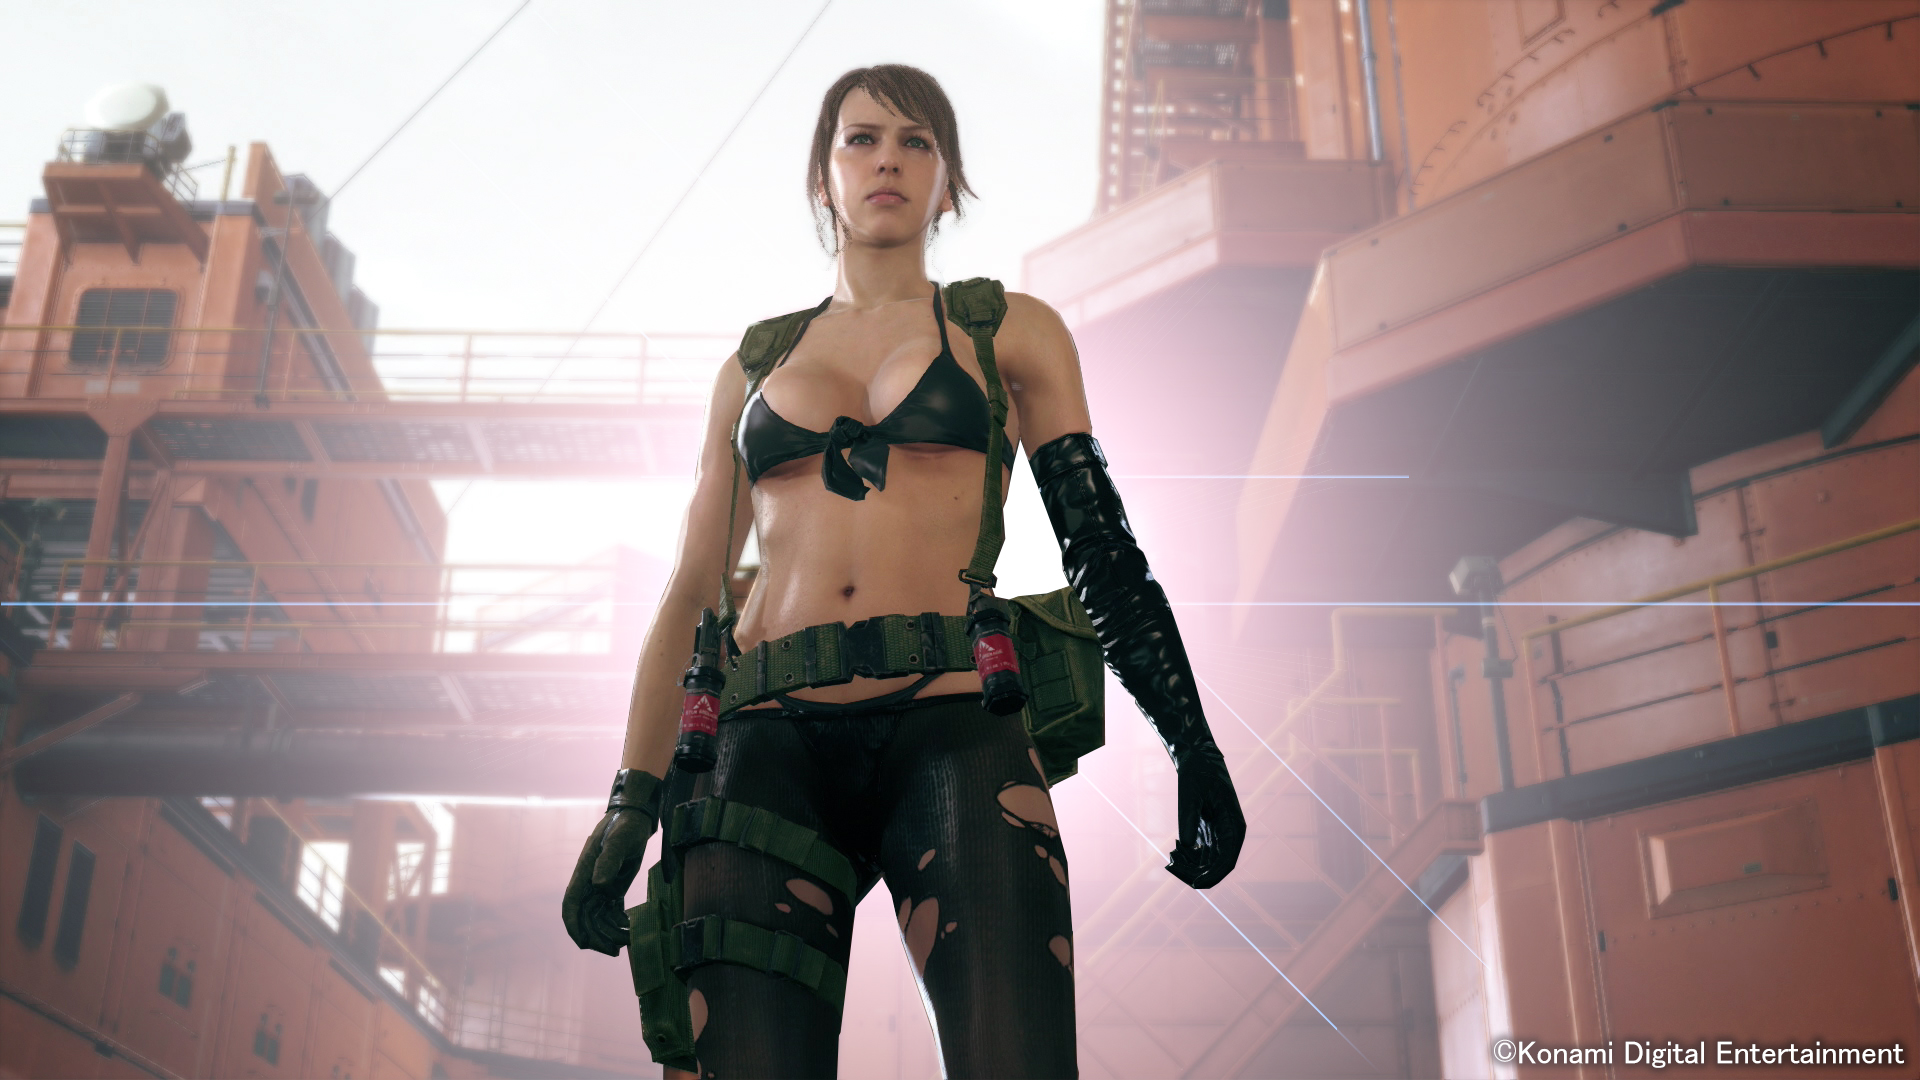 Play as Quiet! In the new Metal Gear Solid 5 update ...